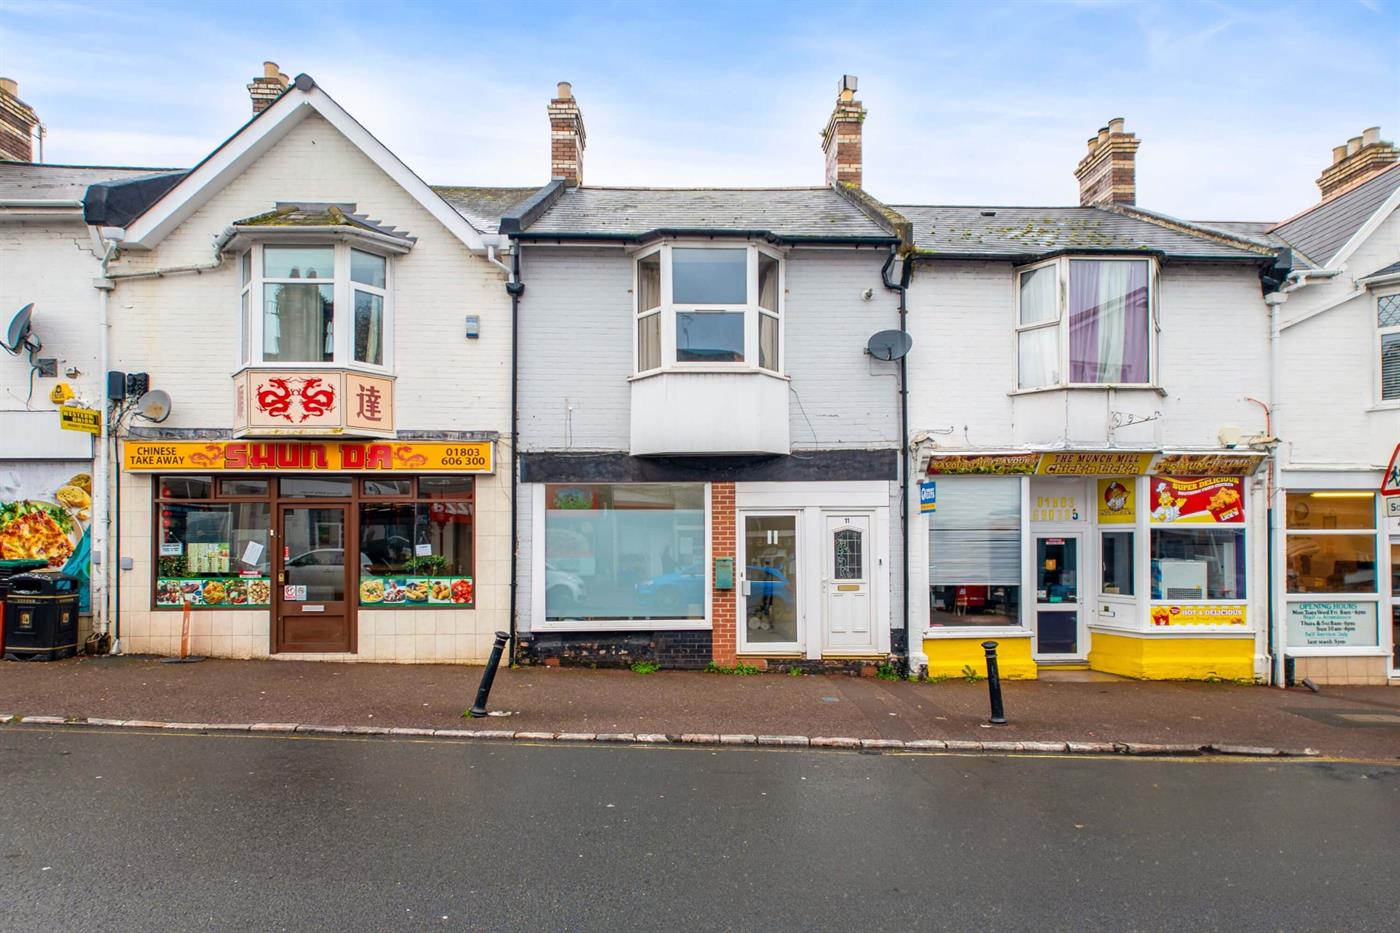 Shop for Sale: Old Mill Road, Chelston, Torquay, TQ2 6AU